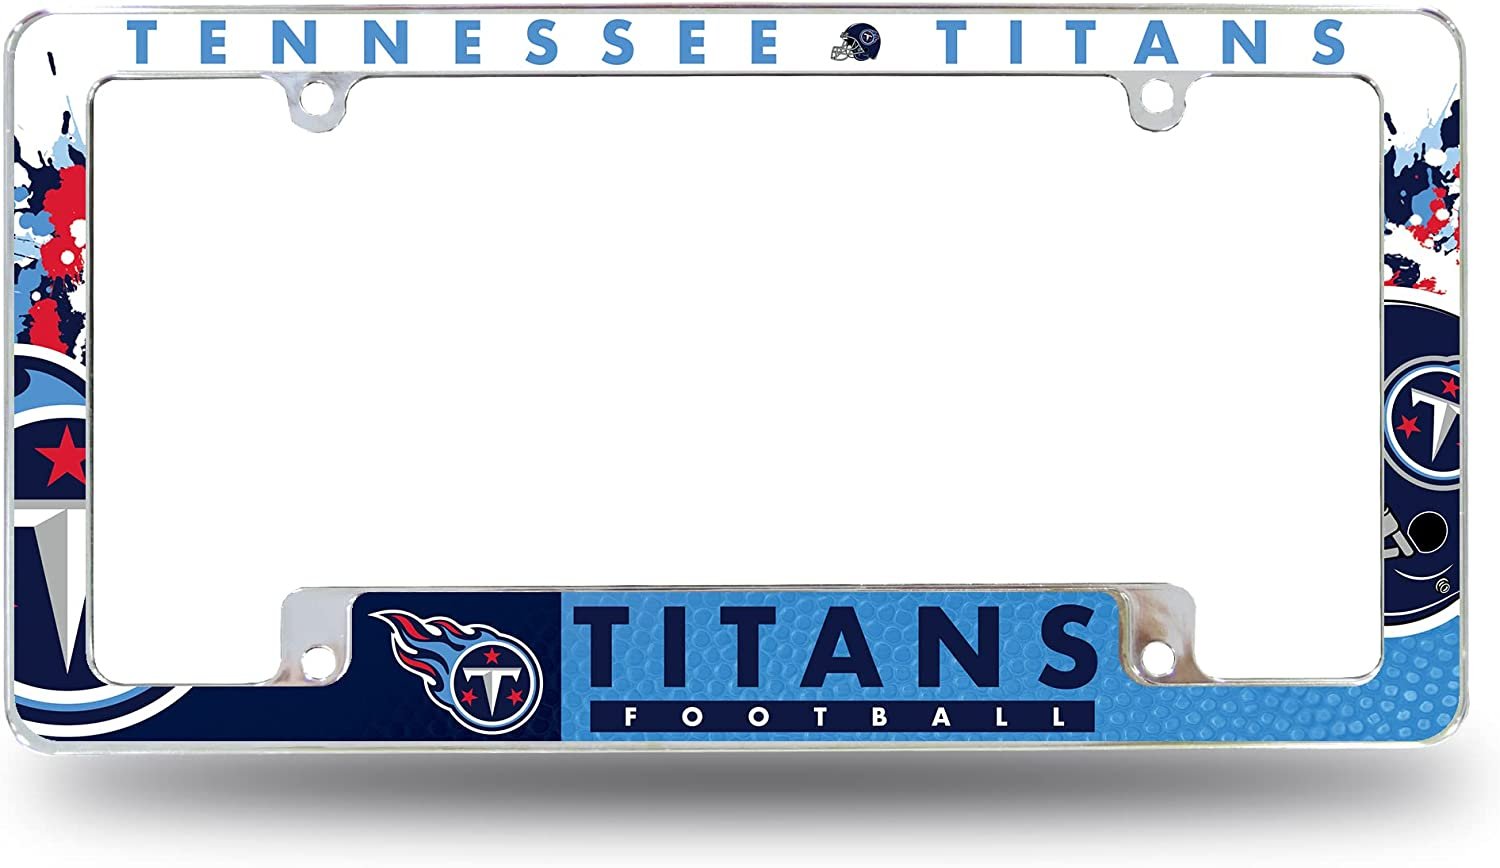 Tennessee Titans Metal License Plate Frame Chrome Tag Cover All Over Design 6x12 Inch